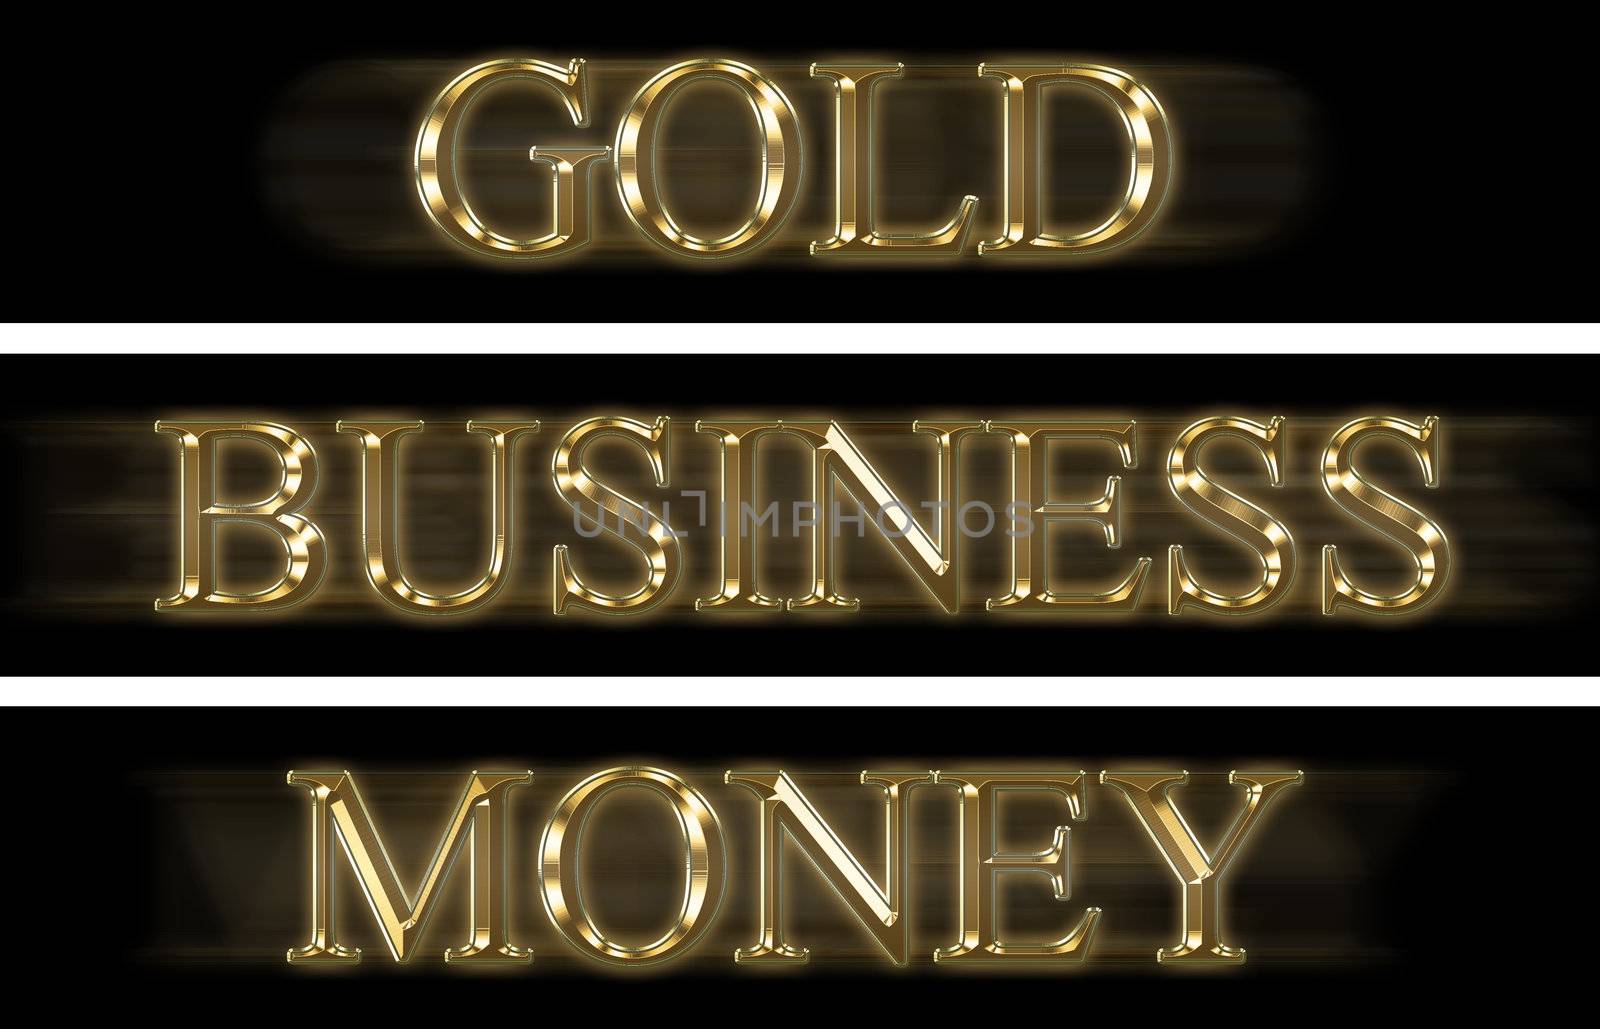 Three banners with golden text: gold, business, money